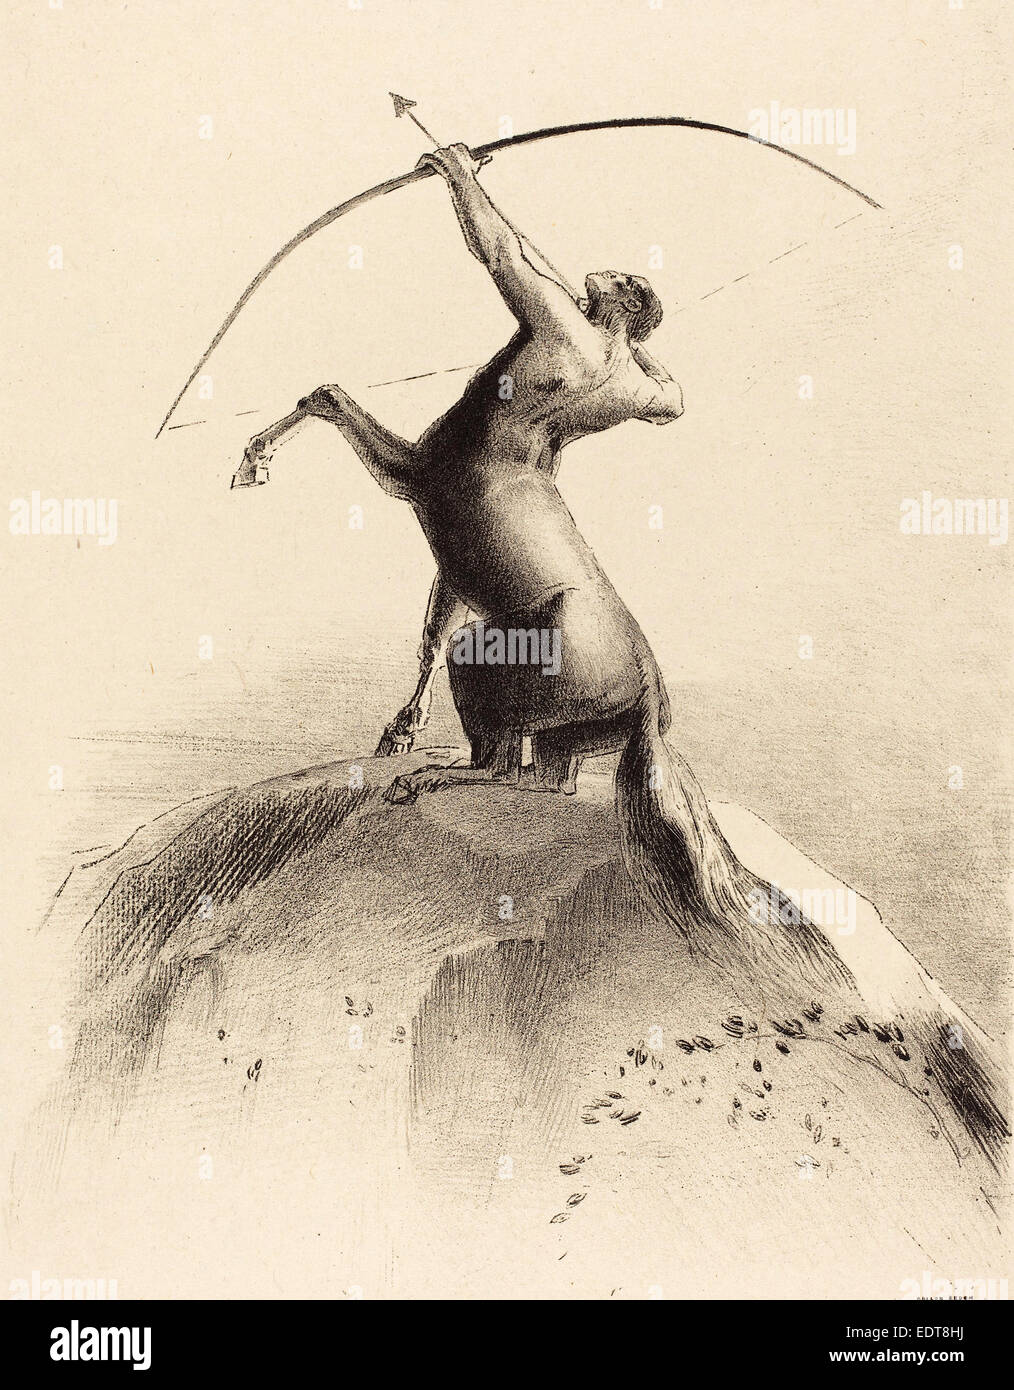 Odilon Redon (French, 1840 - 1916), Centaur visant les Nues (Centaur aiming at the Clouds), 1895, lithograph on chine appliqué Stock Photo